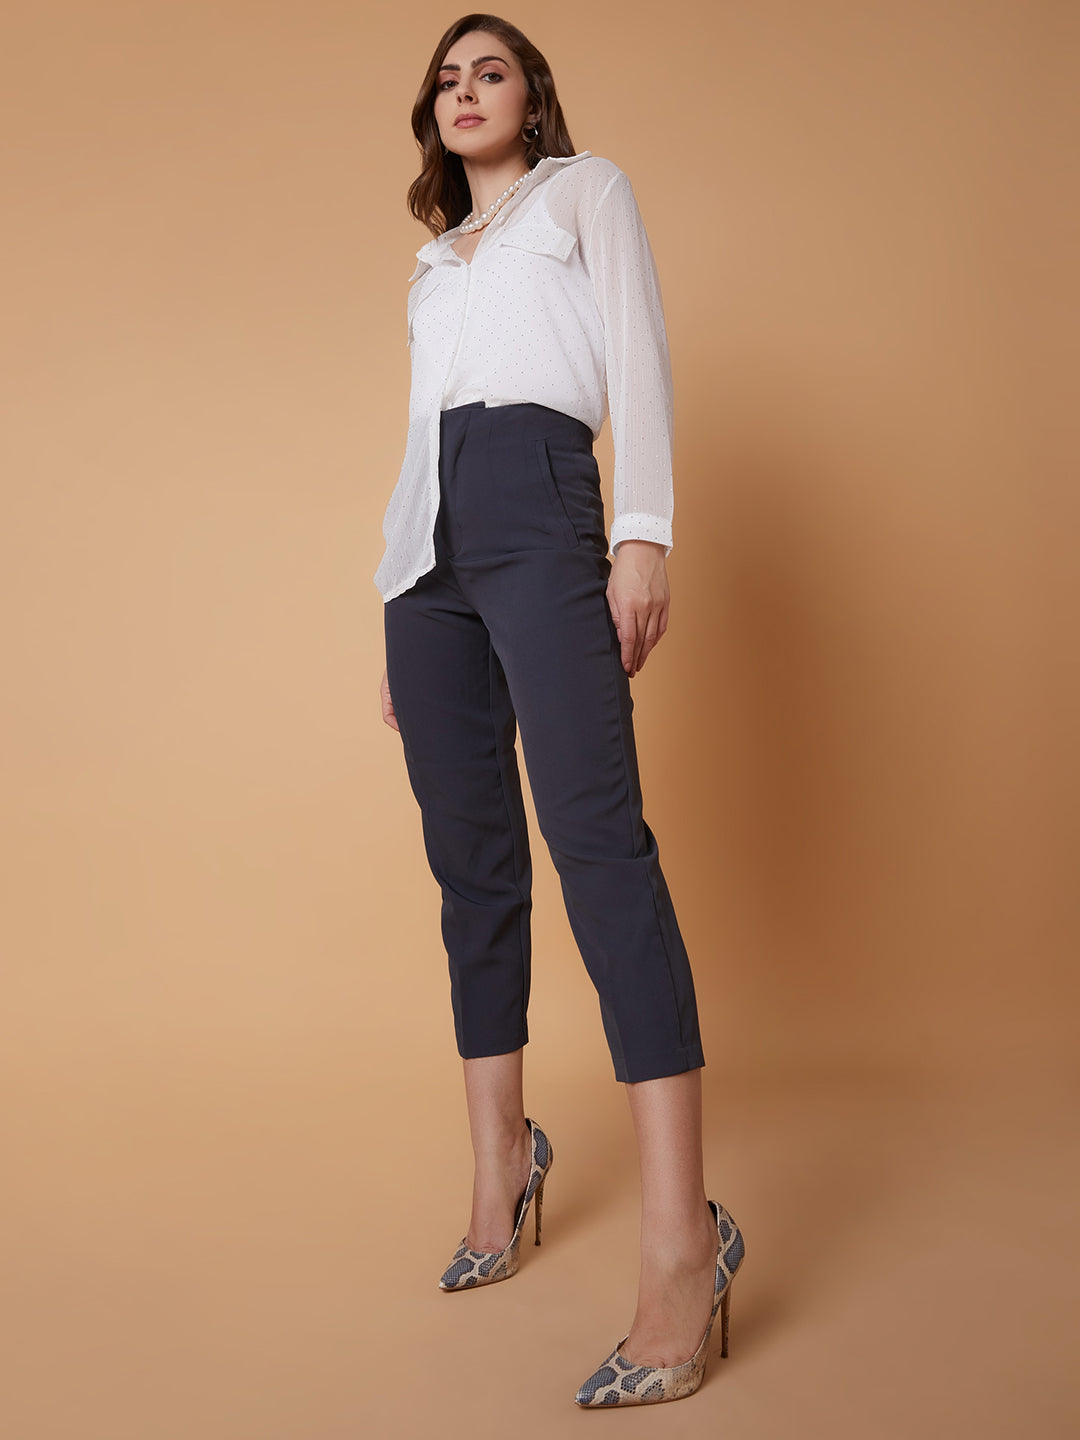 Women Pleated Solid Charcoal Formal Trousers